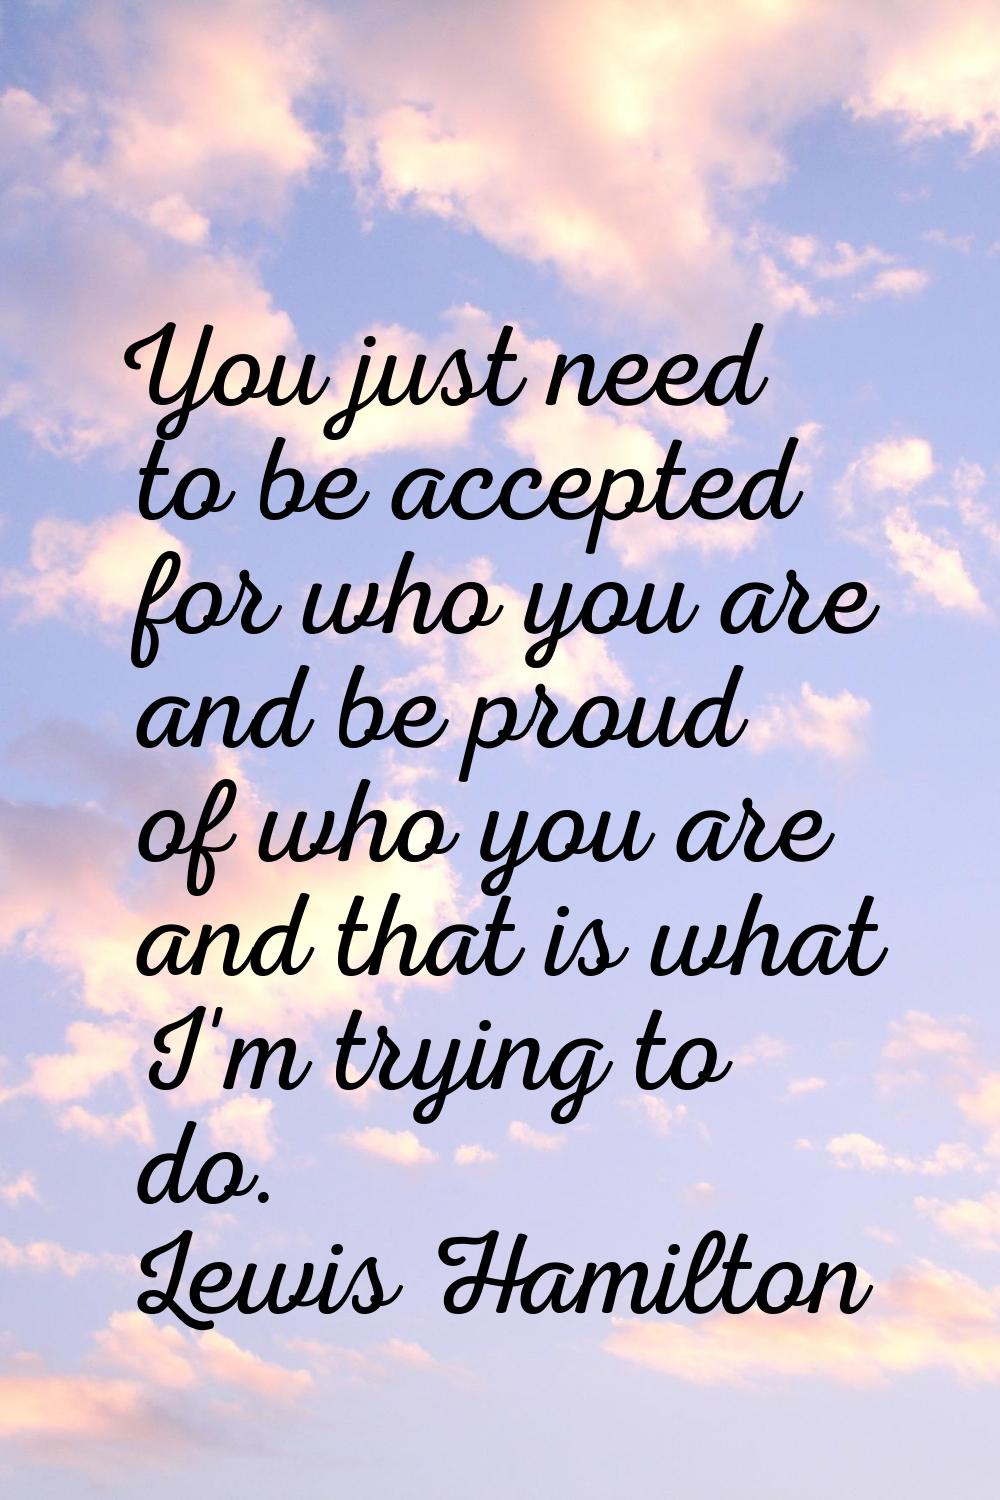 You just need to be accepted for who you are and be proud of who you are and that is what I'm tryin